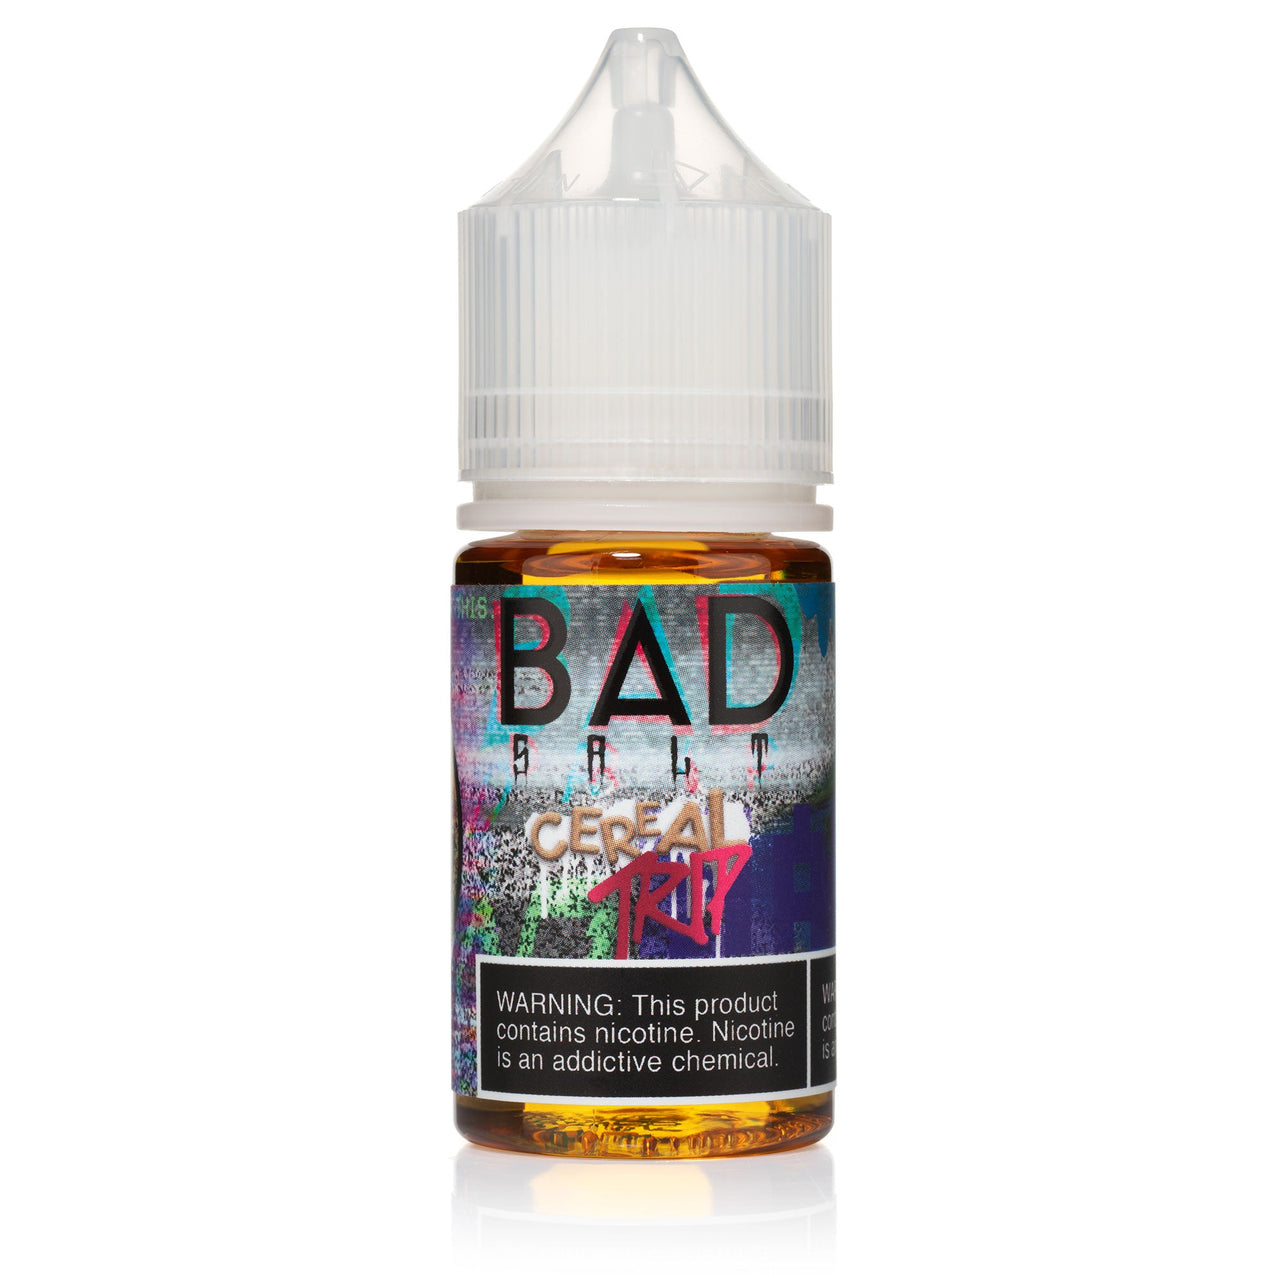 CEREAL TRIP 30ML SALTS BY BAD DRIP LABS - EJUICEOVERSTOCK.COM